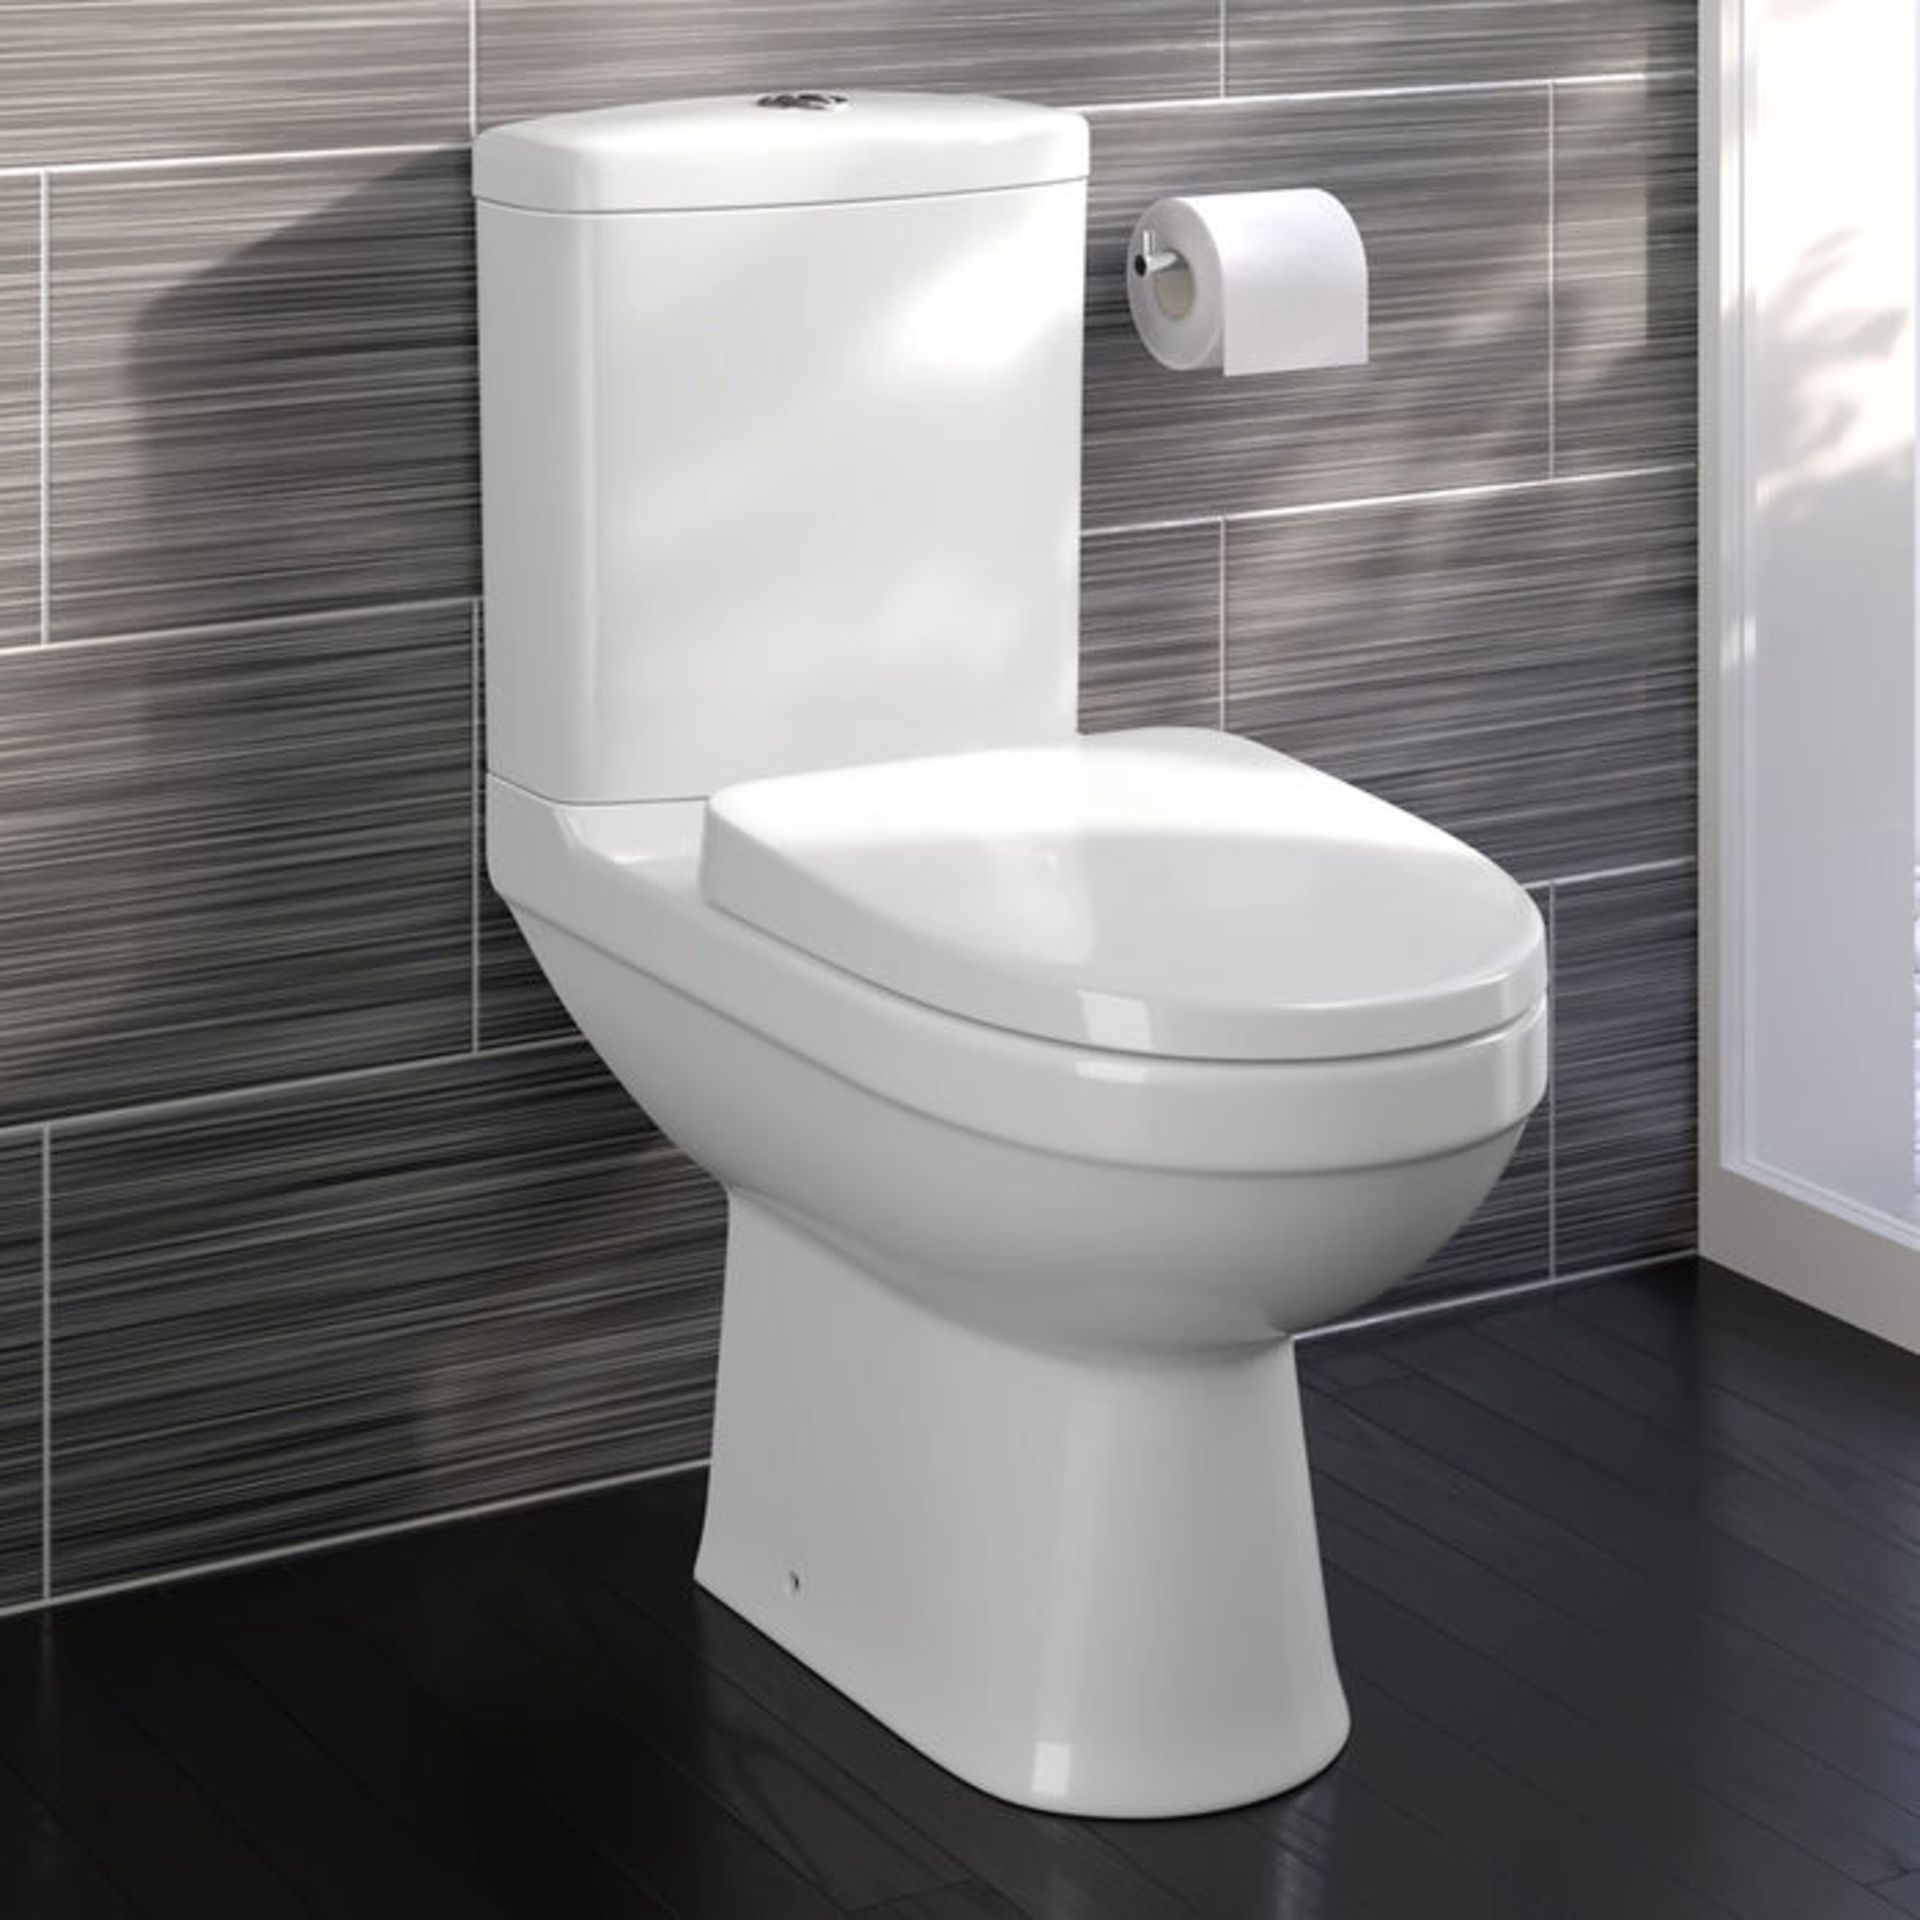 (TA256) Sabrosa II Close Coupled Toilet & Cistern inc Soft Close Seat. Made from White Vitreous